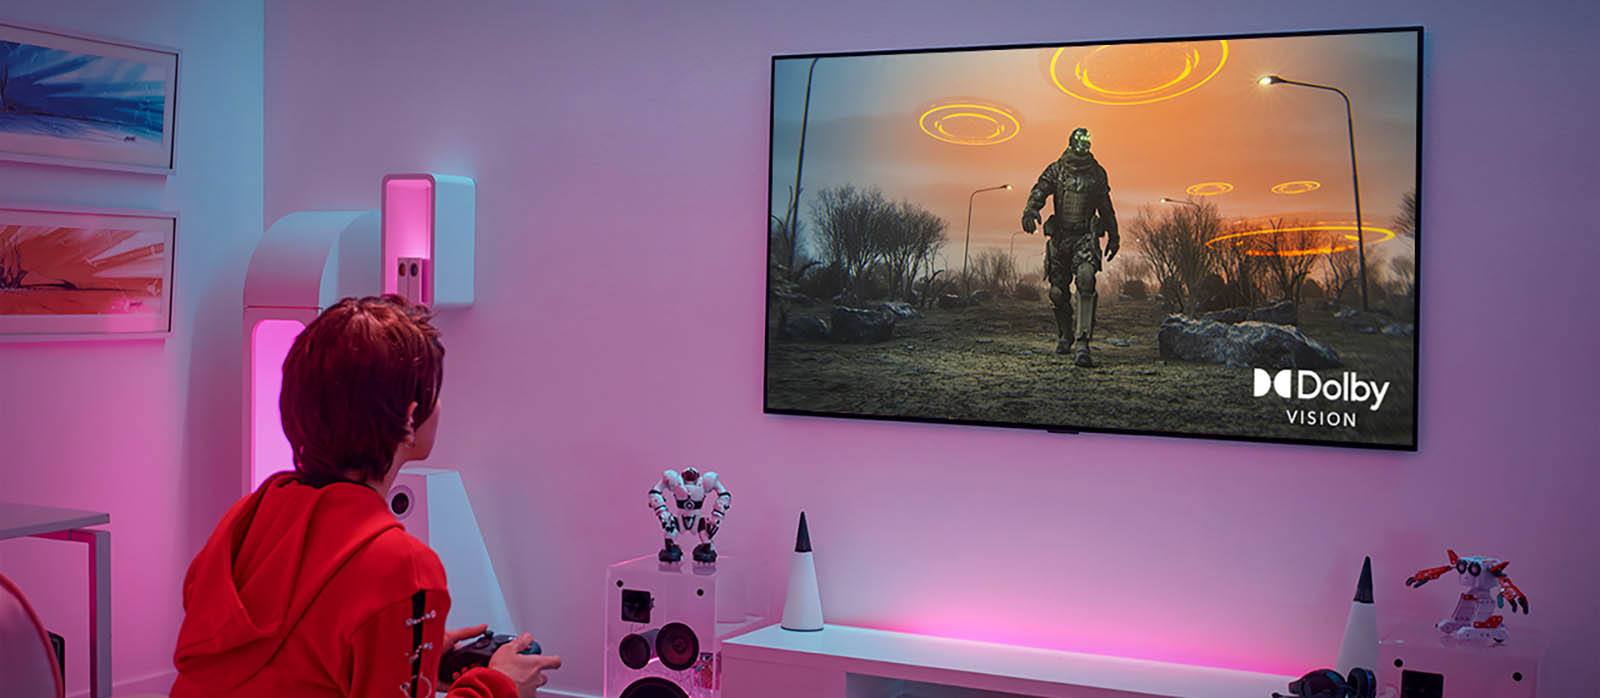 Press image of someone playing a video game on an LG TV